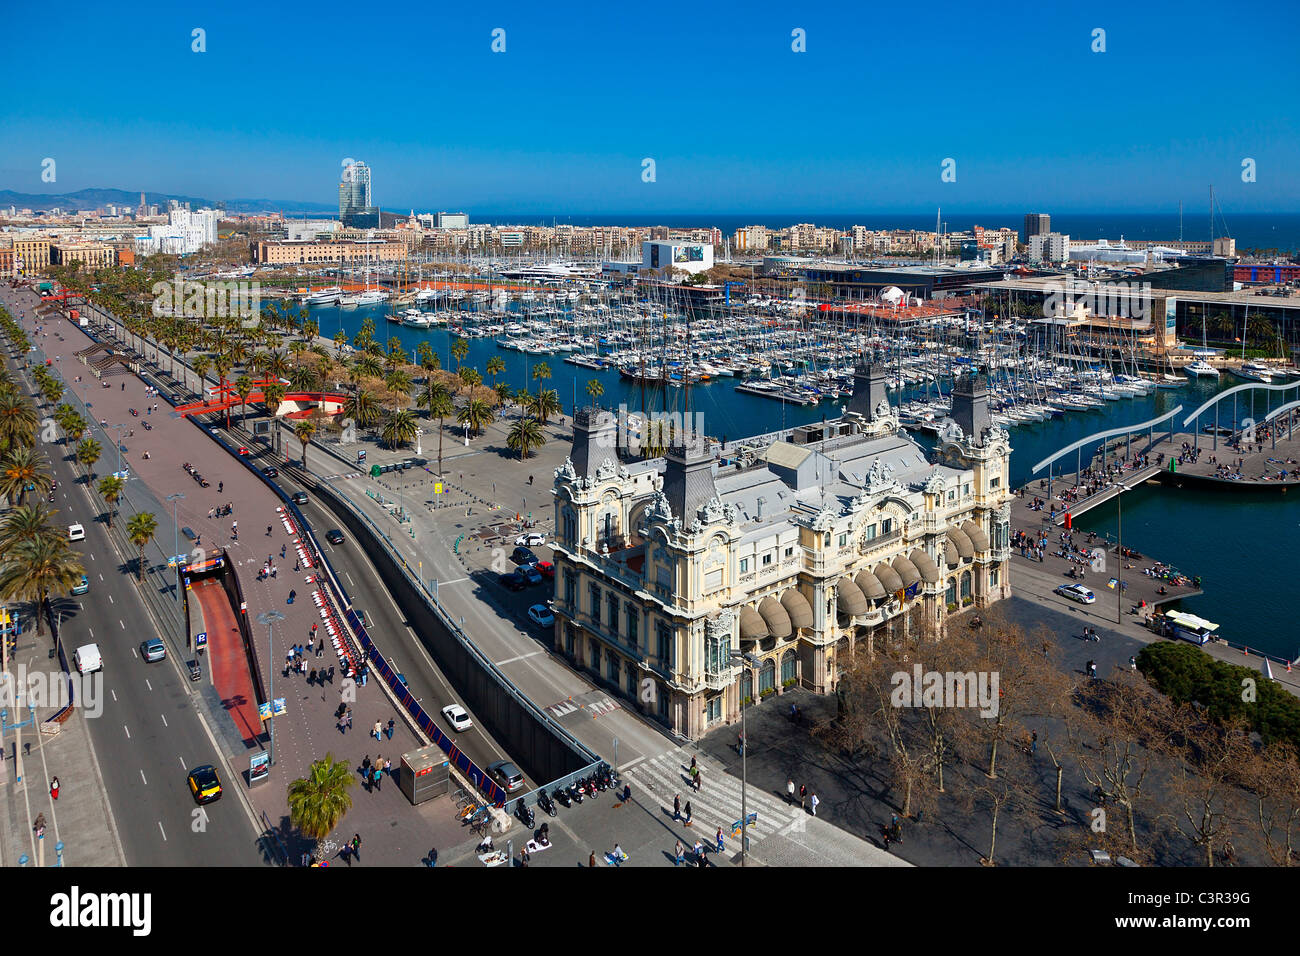 A view of Barcelona Harbor, Catalonia, Spain, showing the harbor Stock Photo